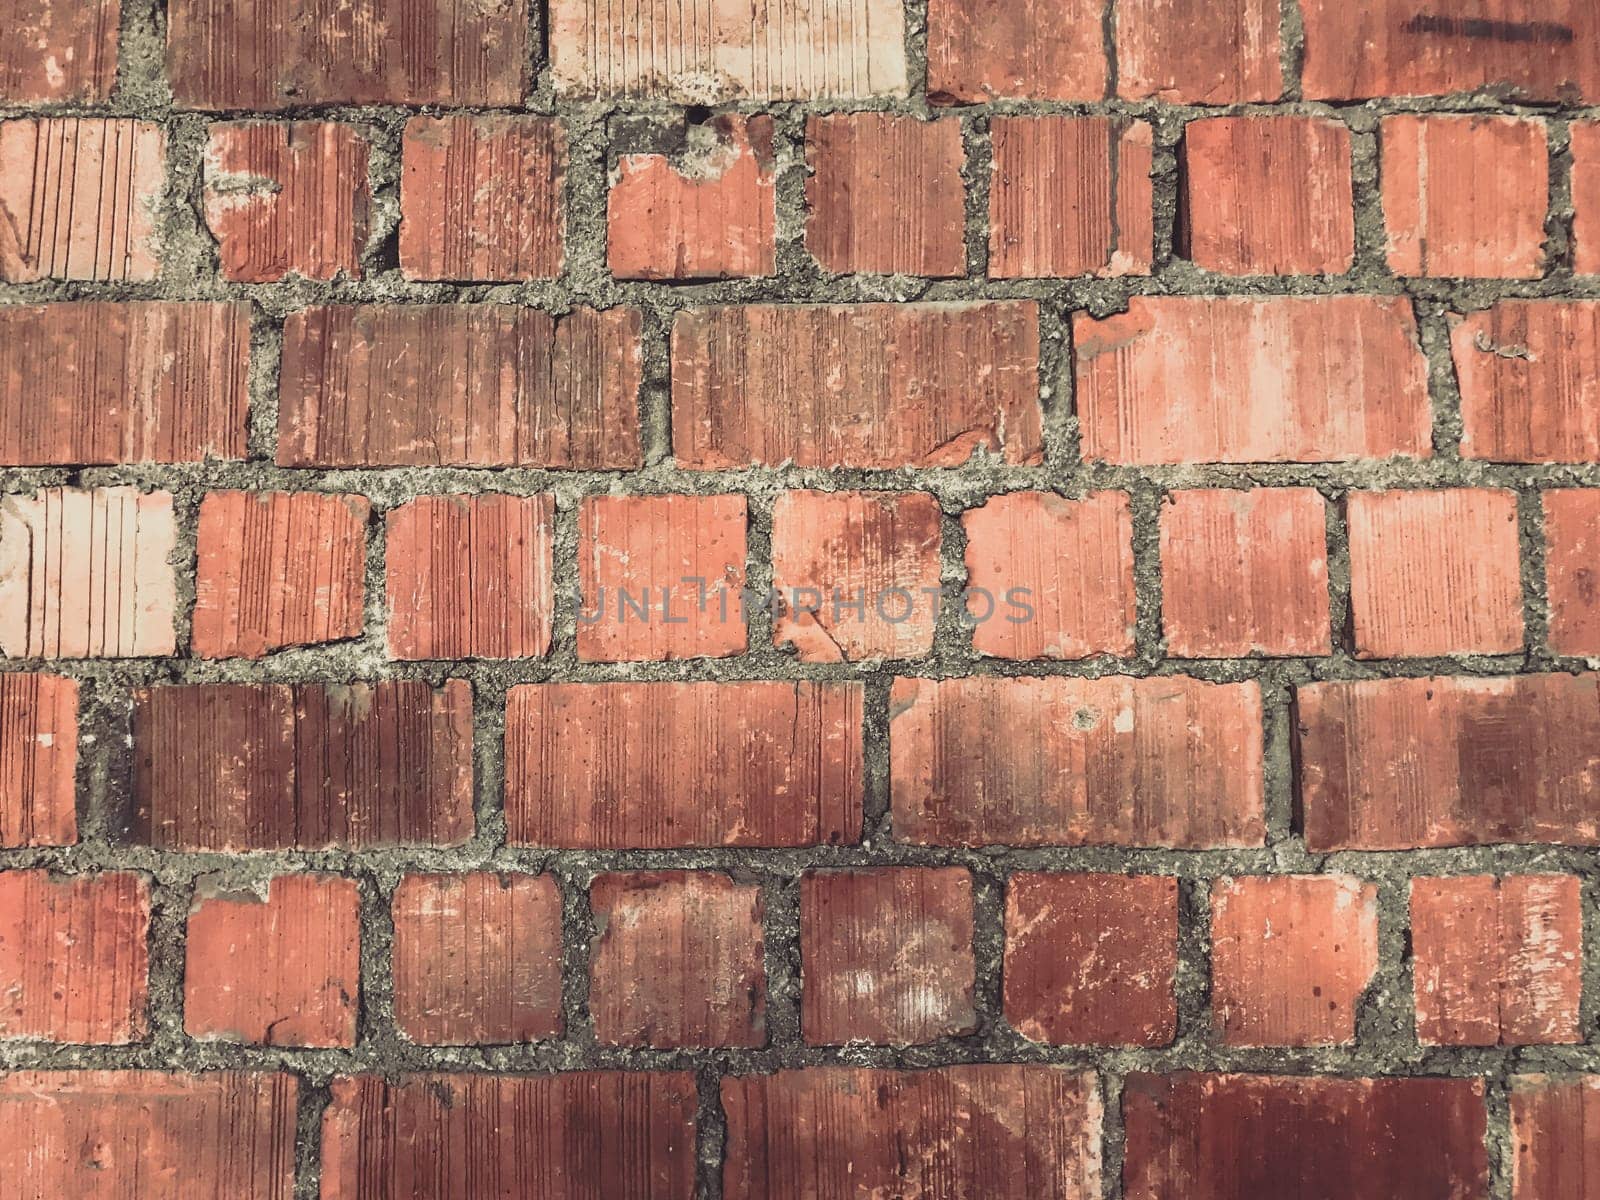 A brick wall with a rough texture and a faded red color by Alla_Morozova93